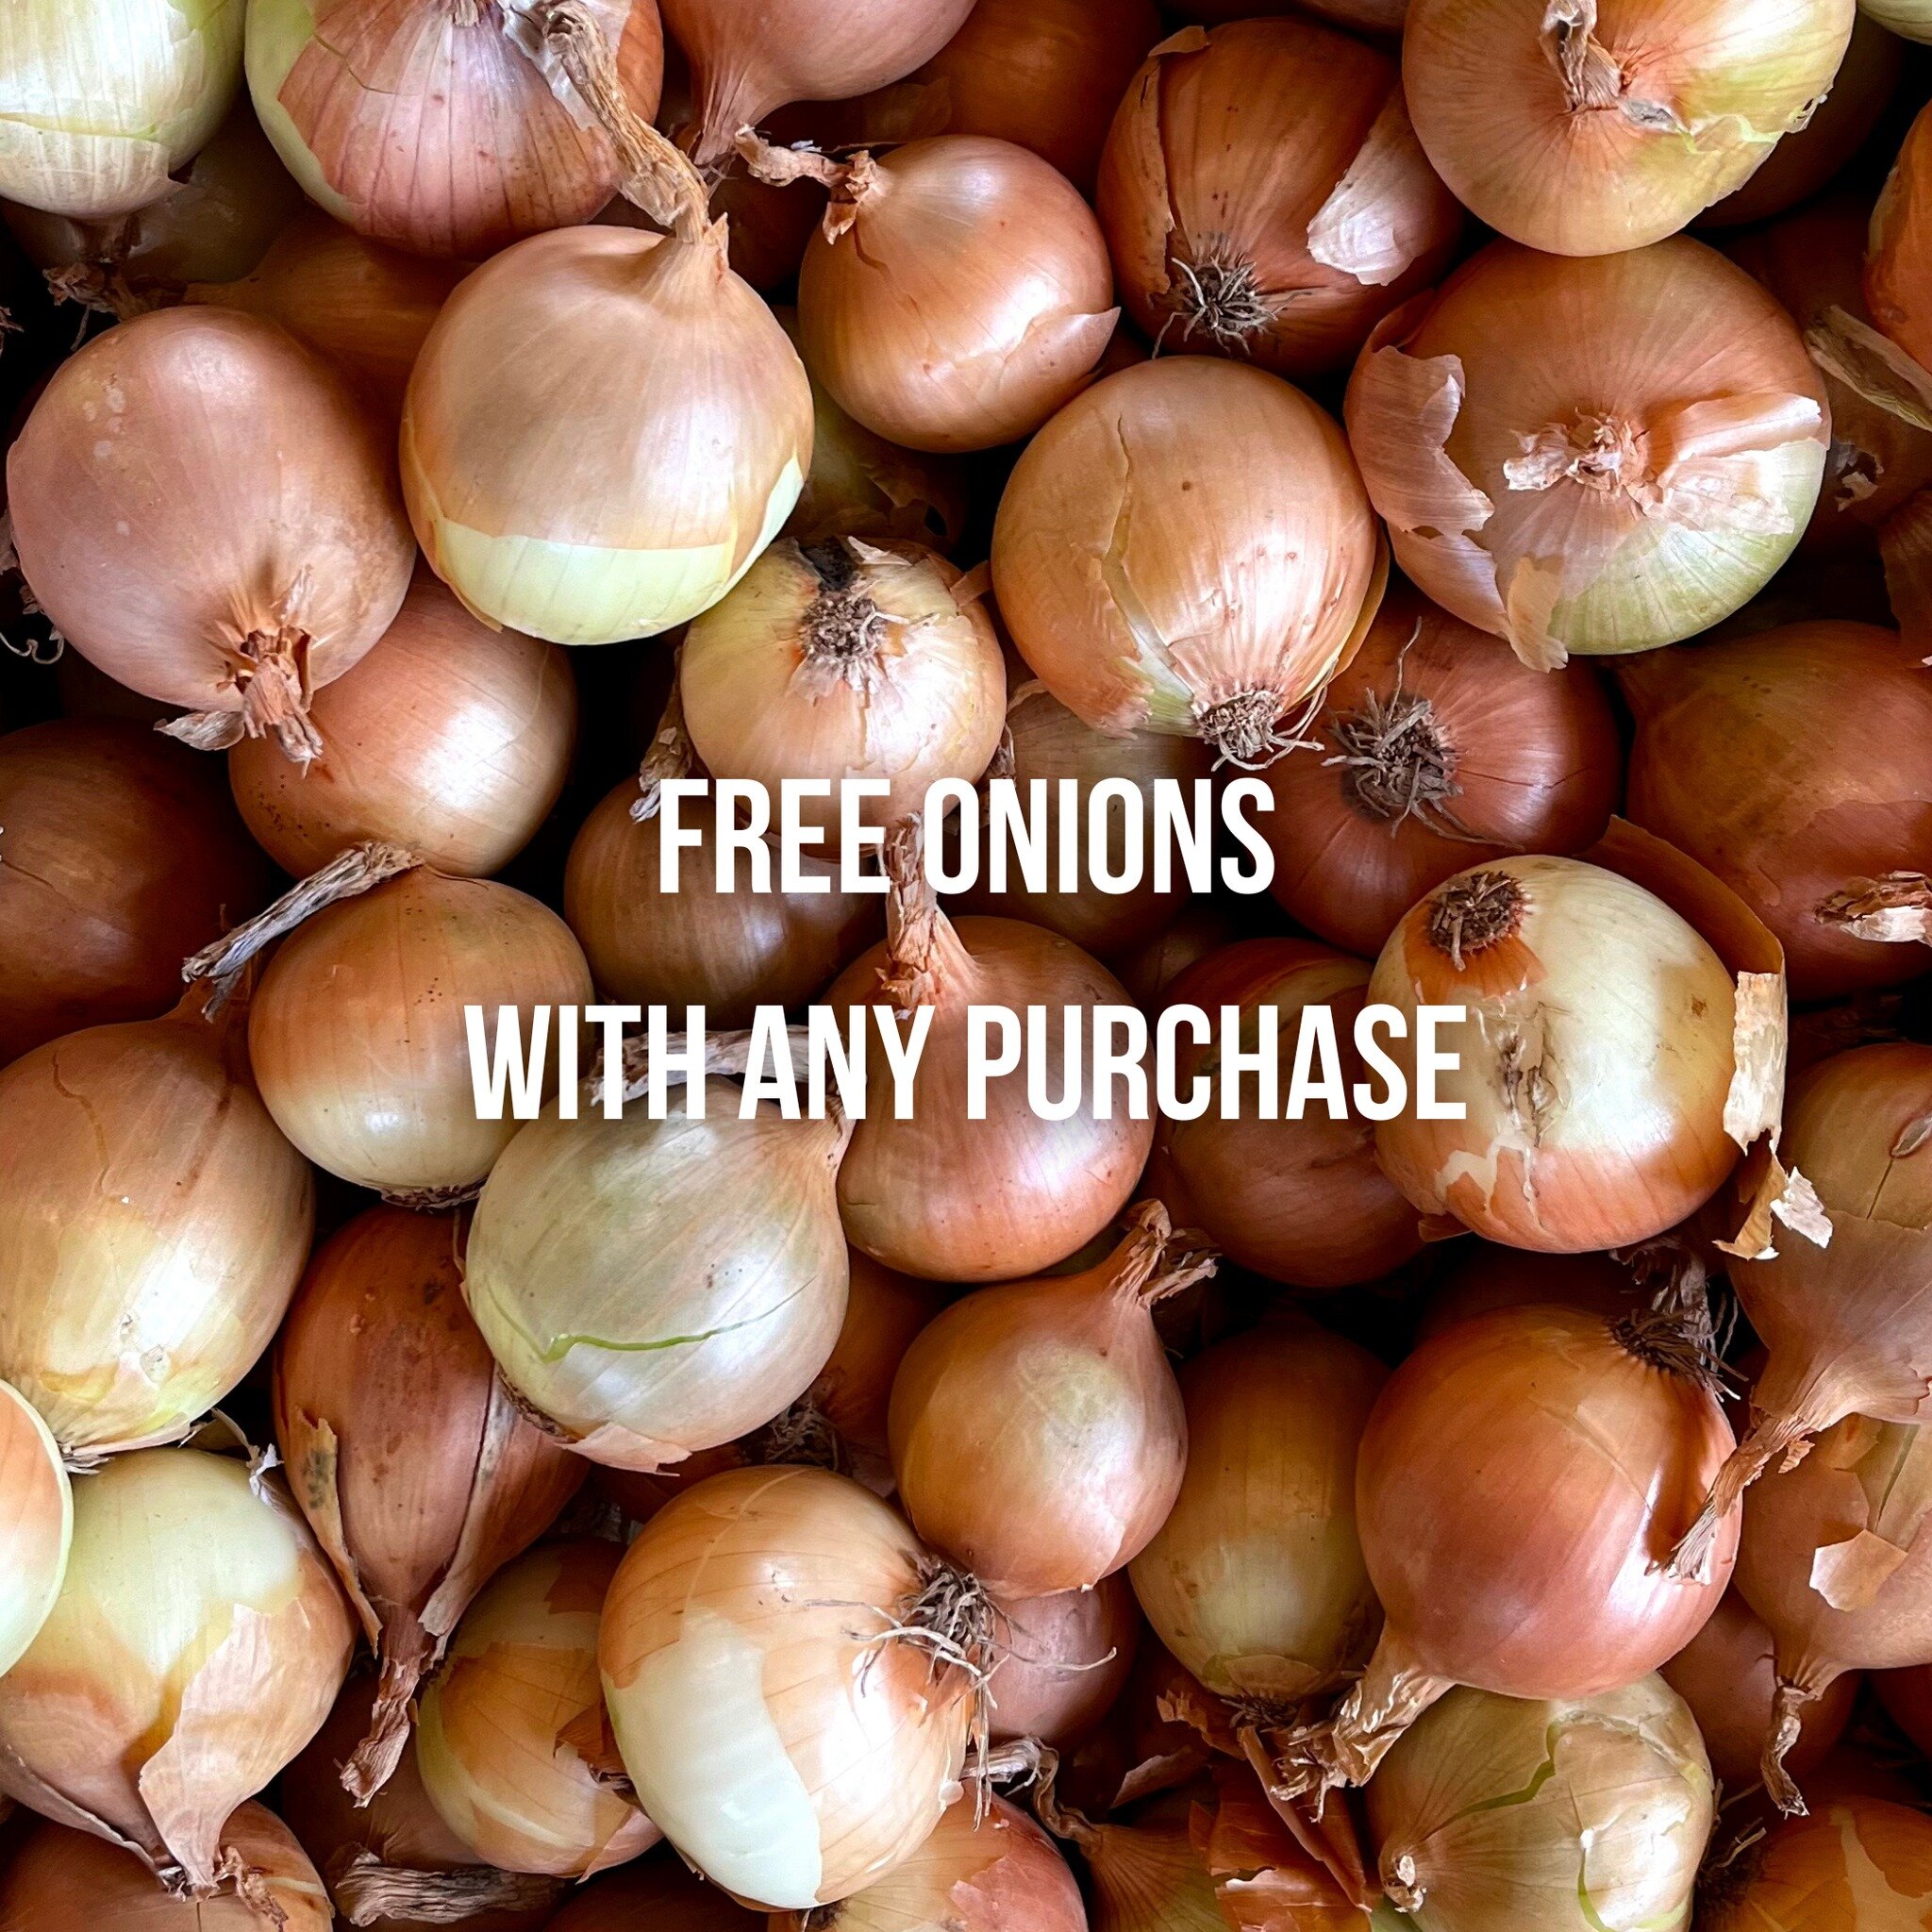 FREE ONIONS 🧅
Make any purchase in-store with us and grab some free onions on your way out! Available while stocks last🌱